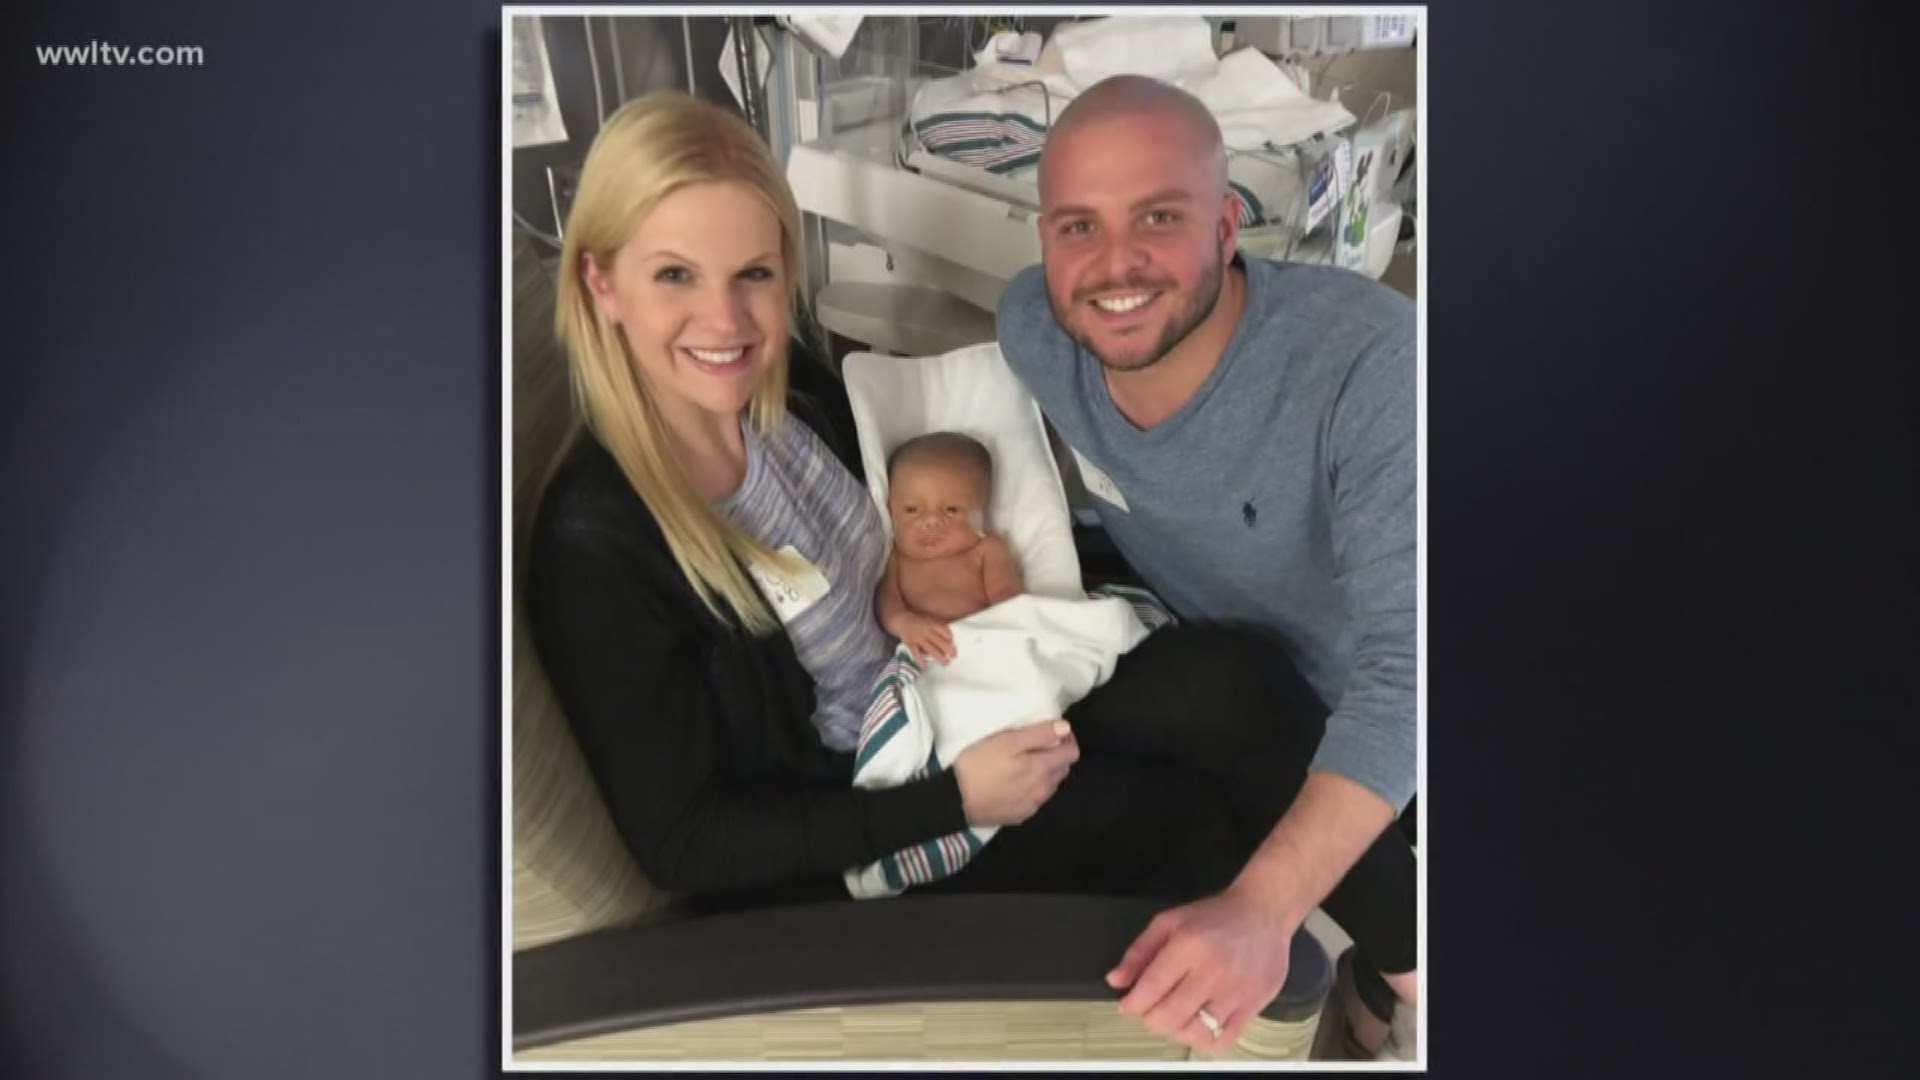 We are giving you a very adorable update on the Coyle family and their little miracle Carson Joseph Coyle.